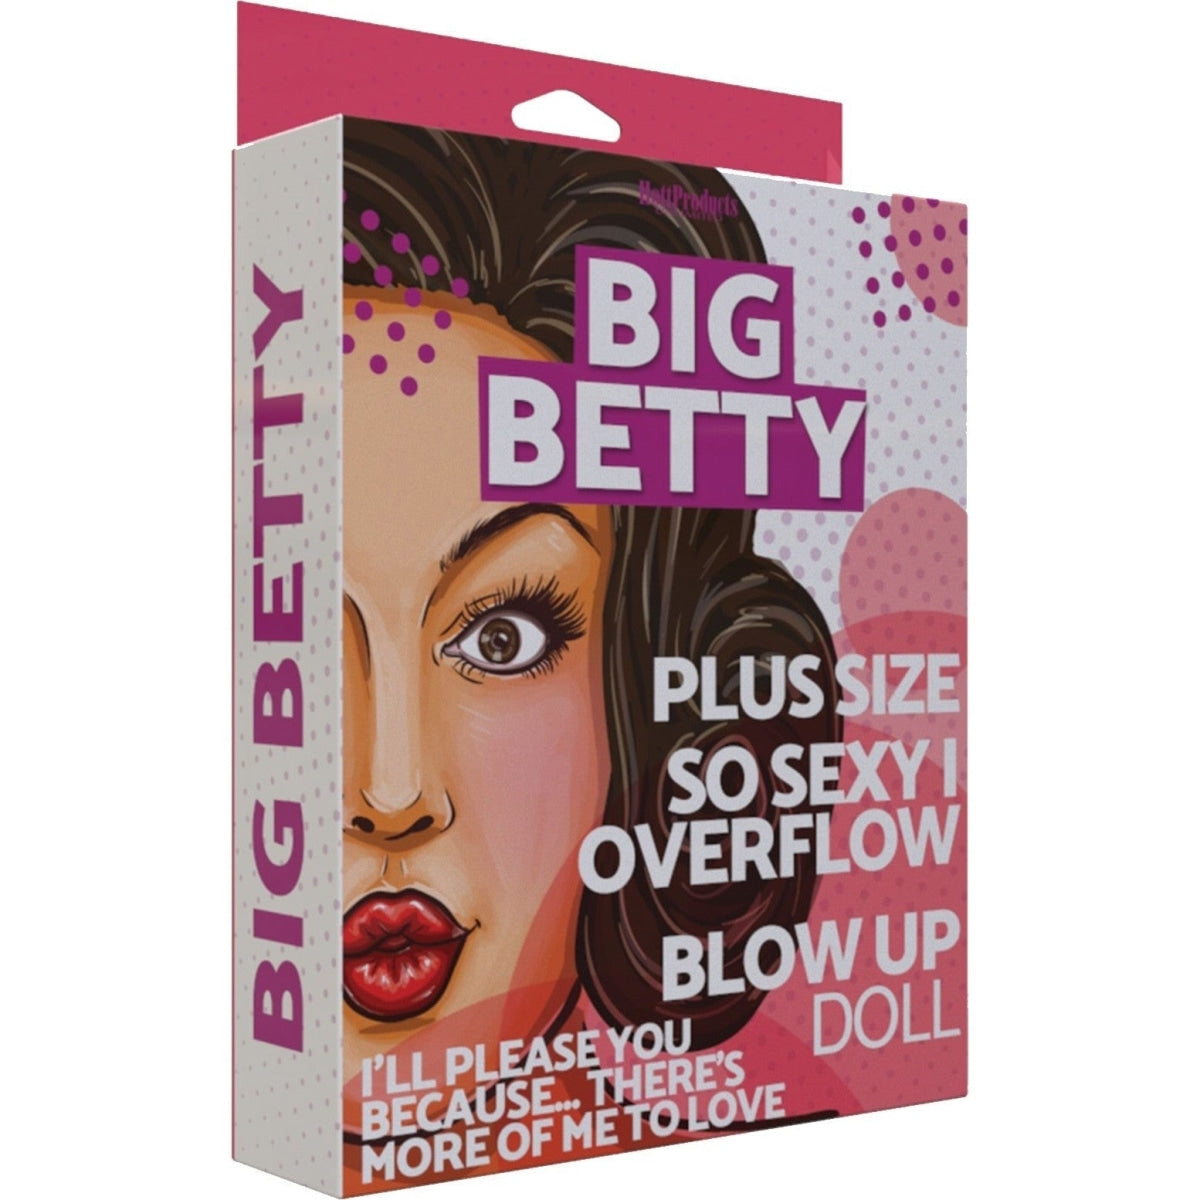 Big Betty Inflatable Love Doll Intimates Adult Boutique